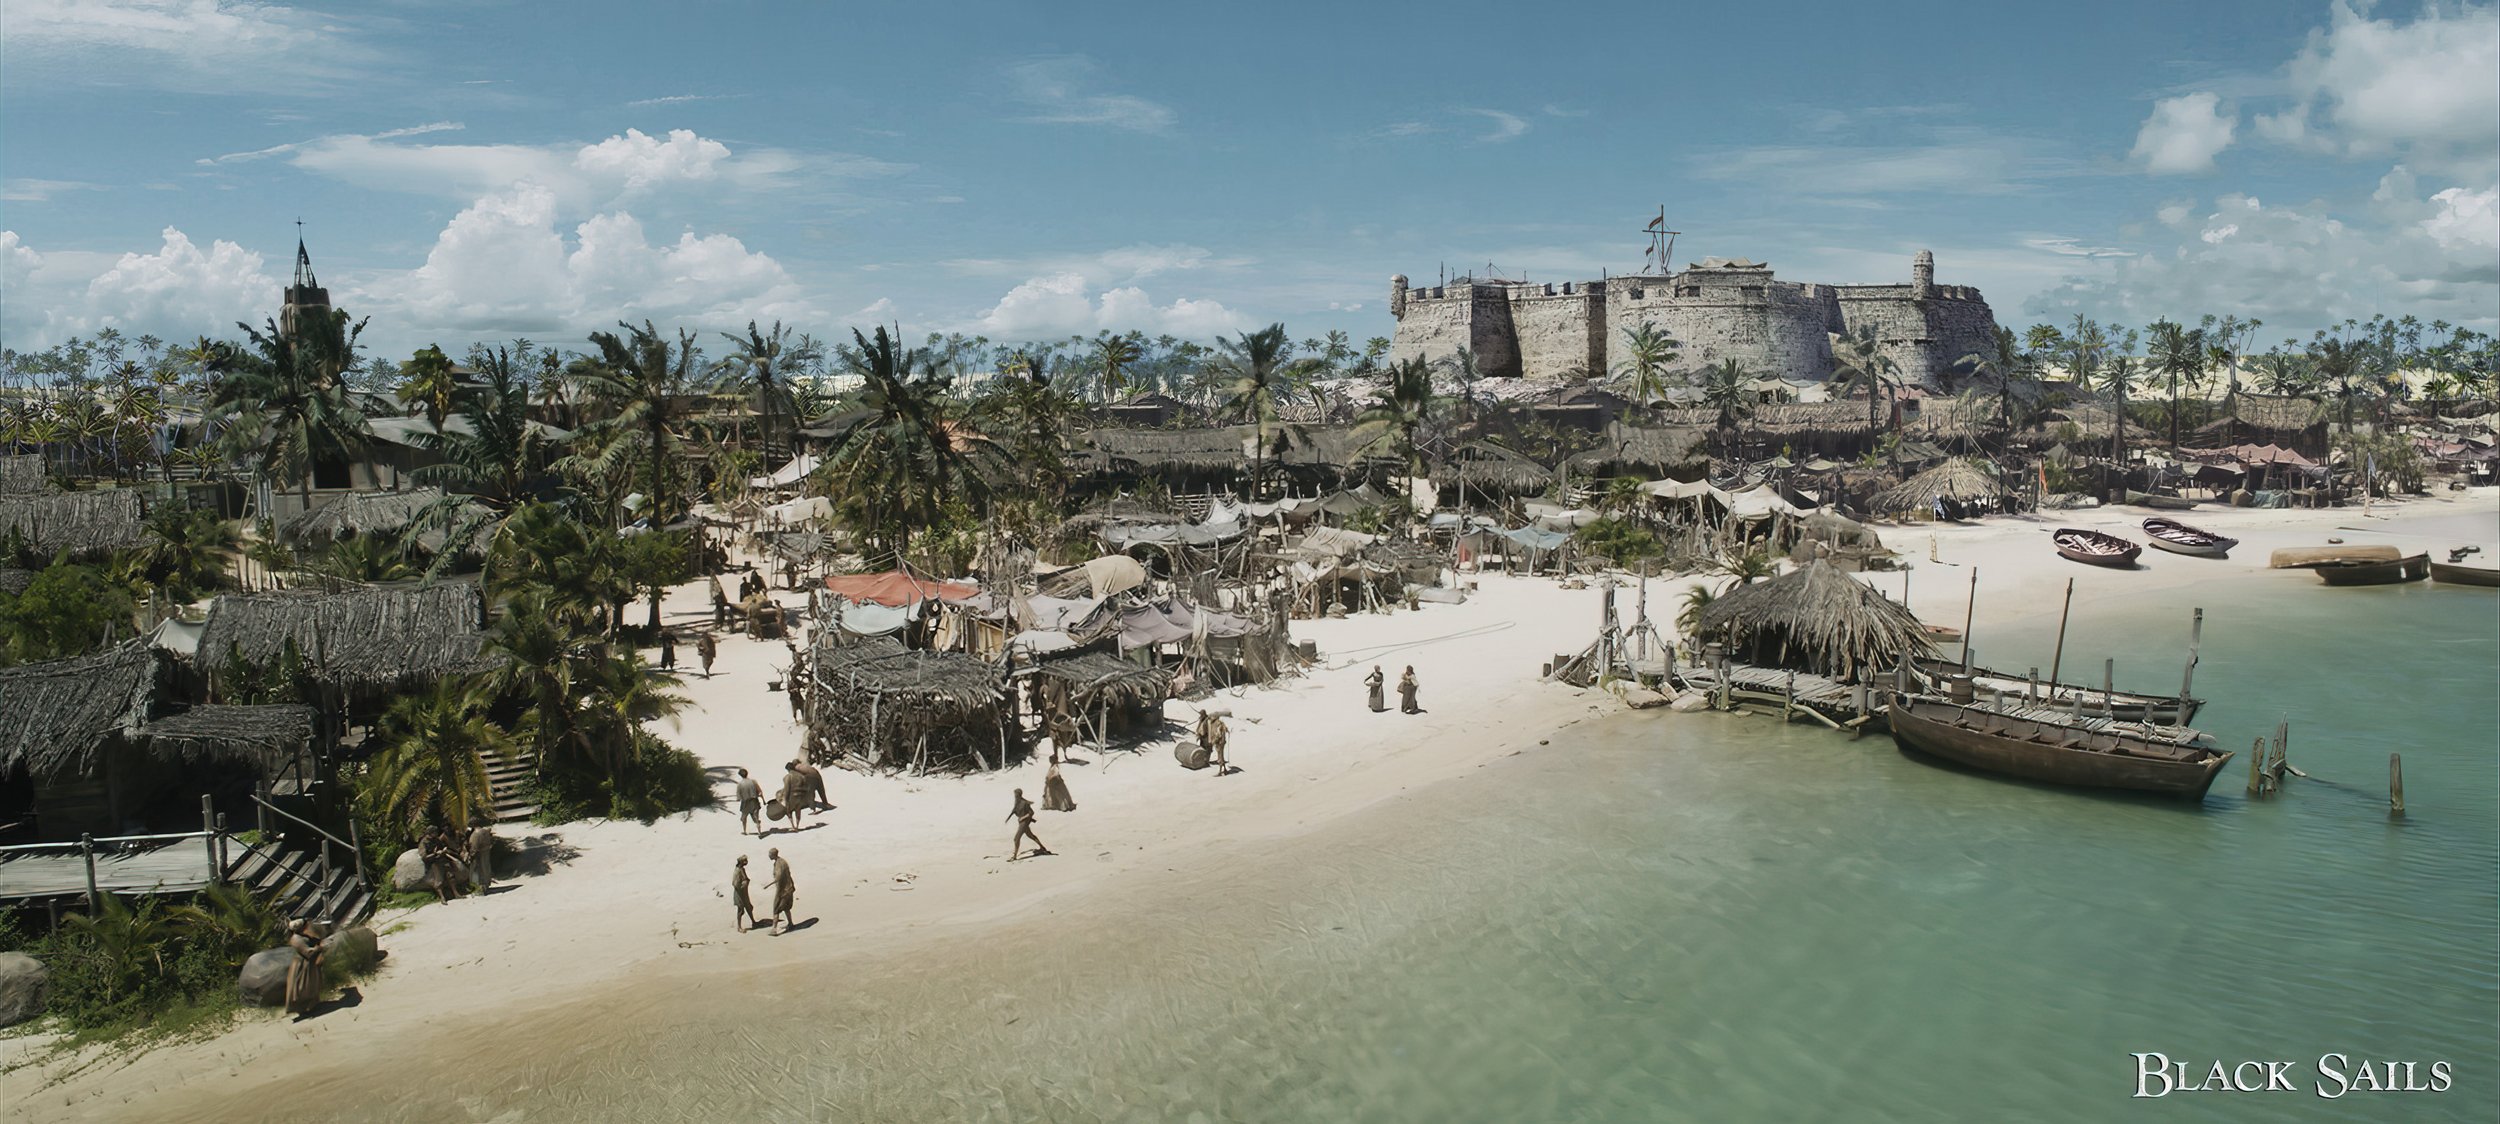 08_Black_sails_town2-gigapixel-low_res-scale-2_00x.jpg